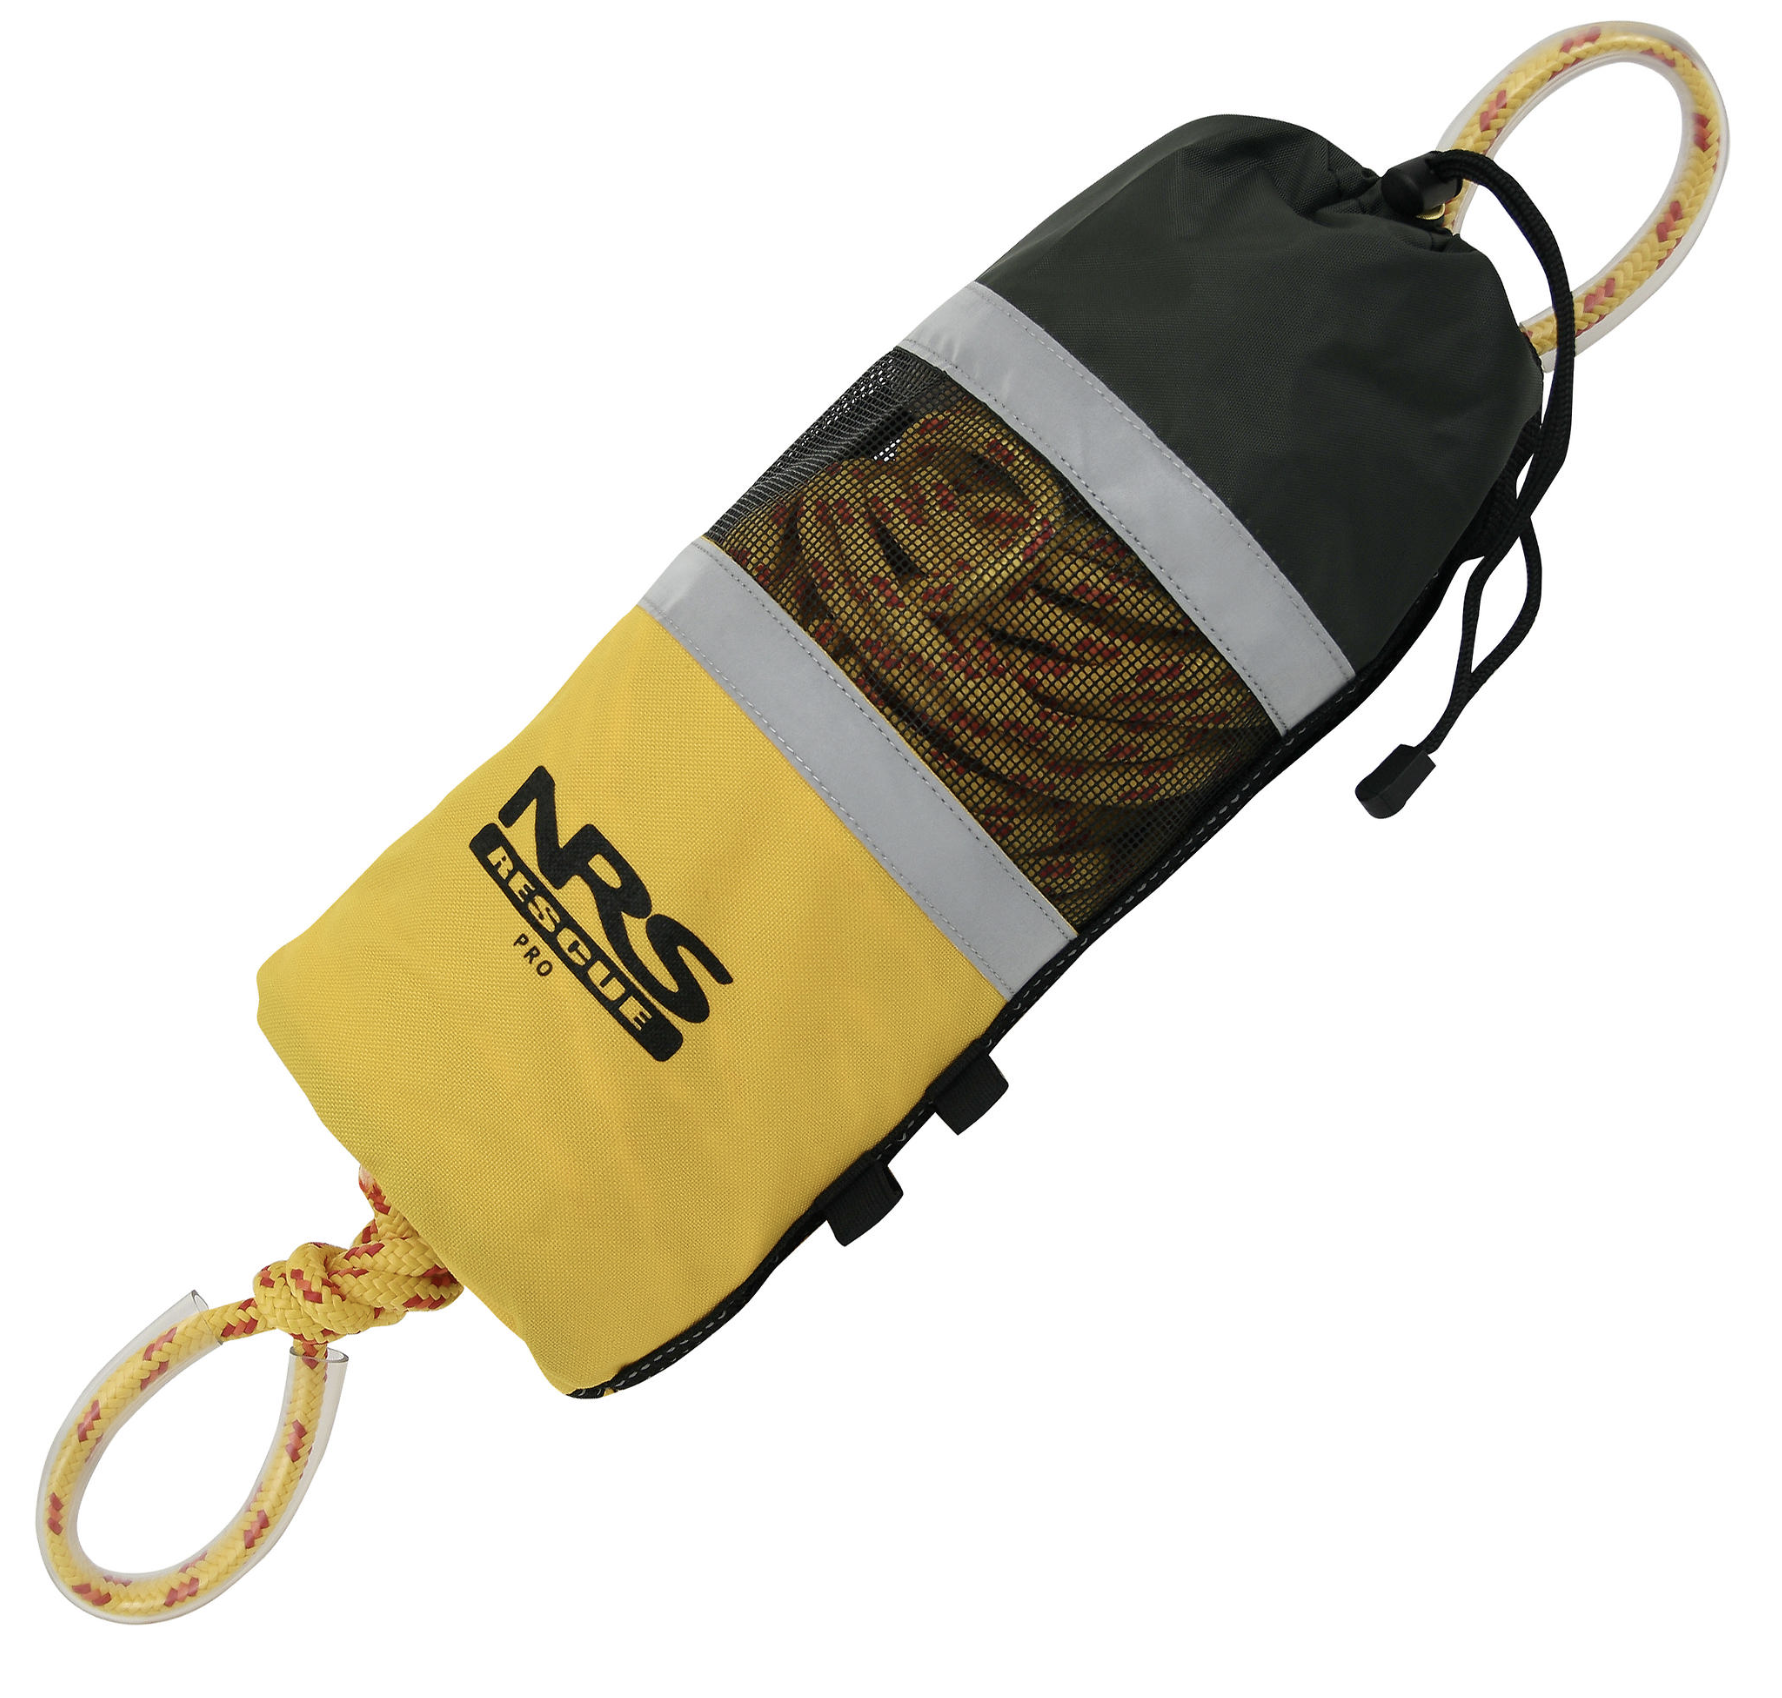 Safety & Rescue: Pro Rescue Throw Bag by NRS - Image 4813